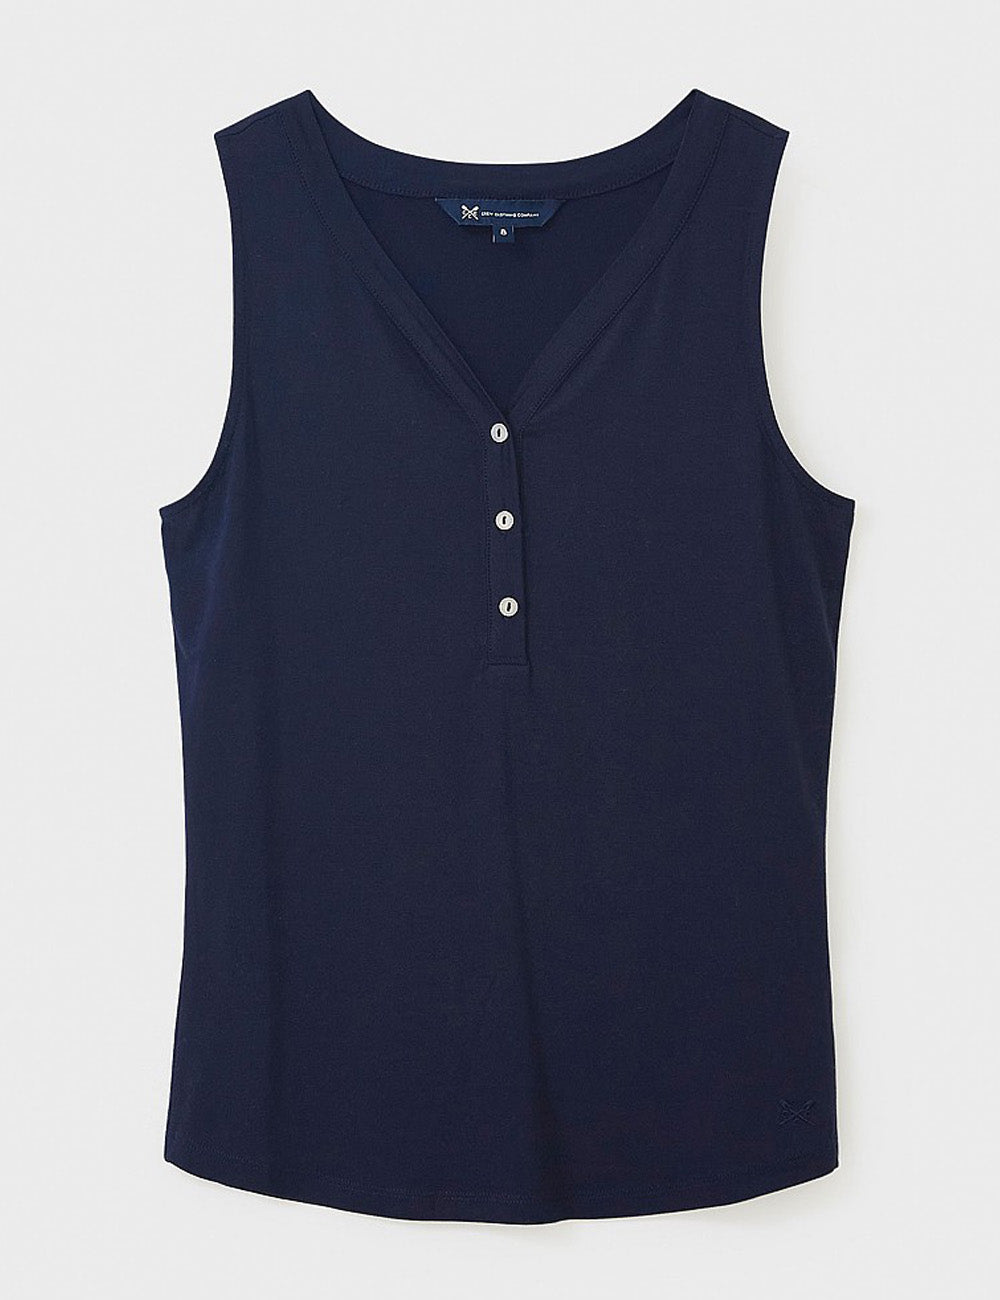 Crew Clothing's Henley Vest in Navy on a white background